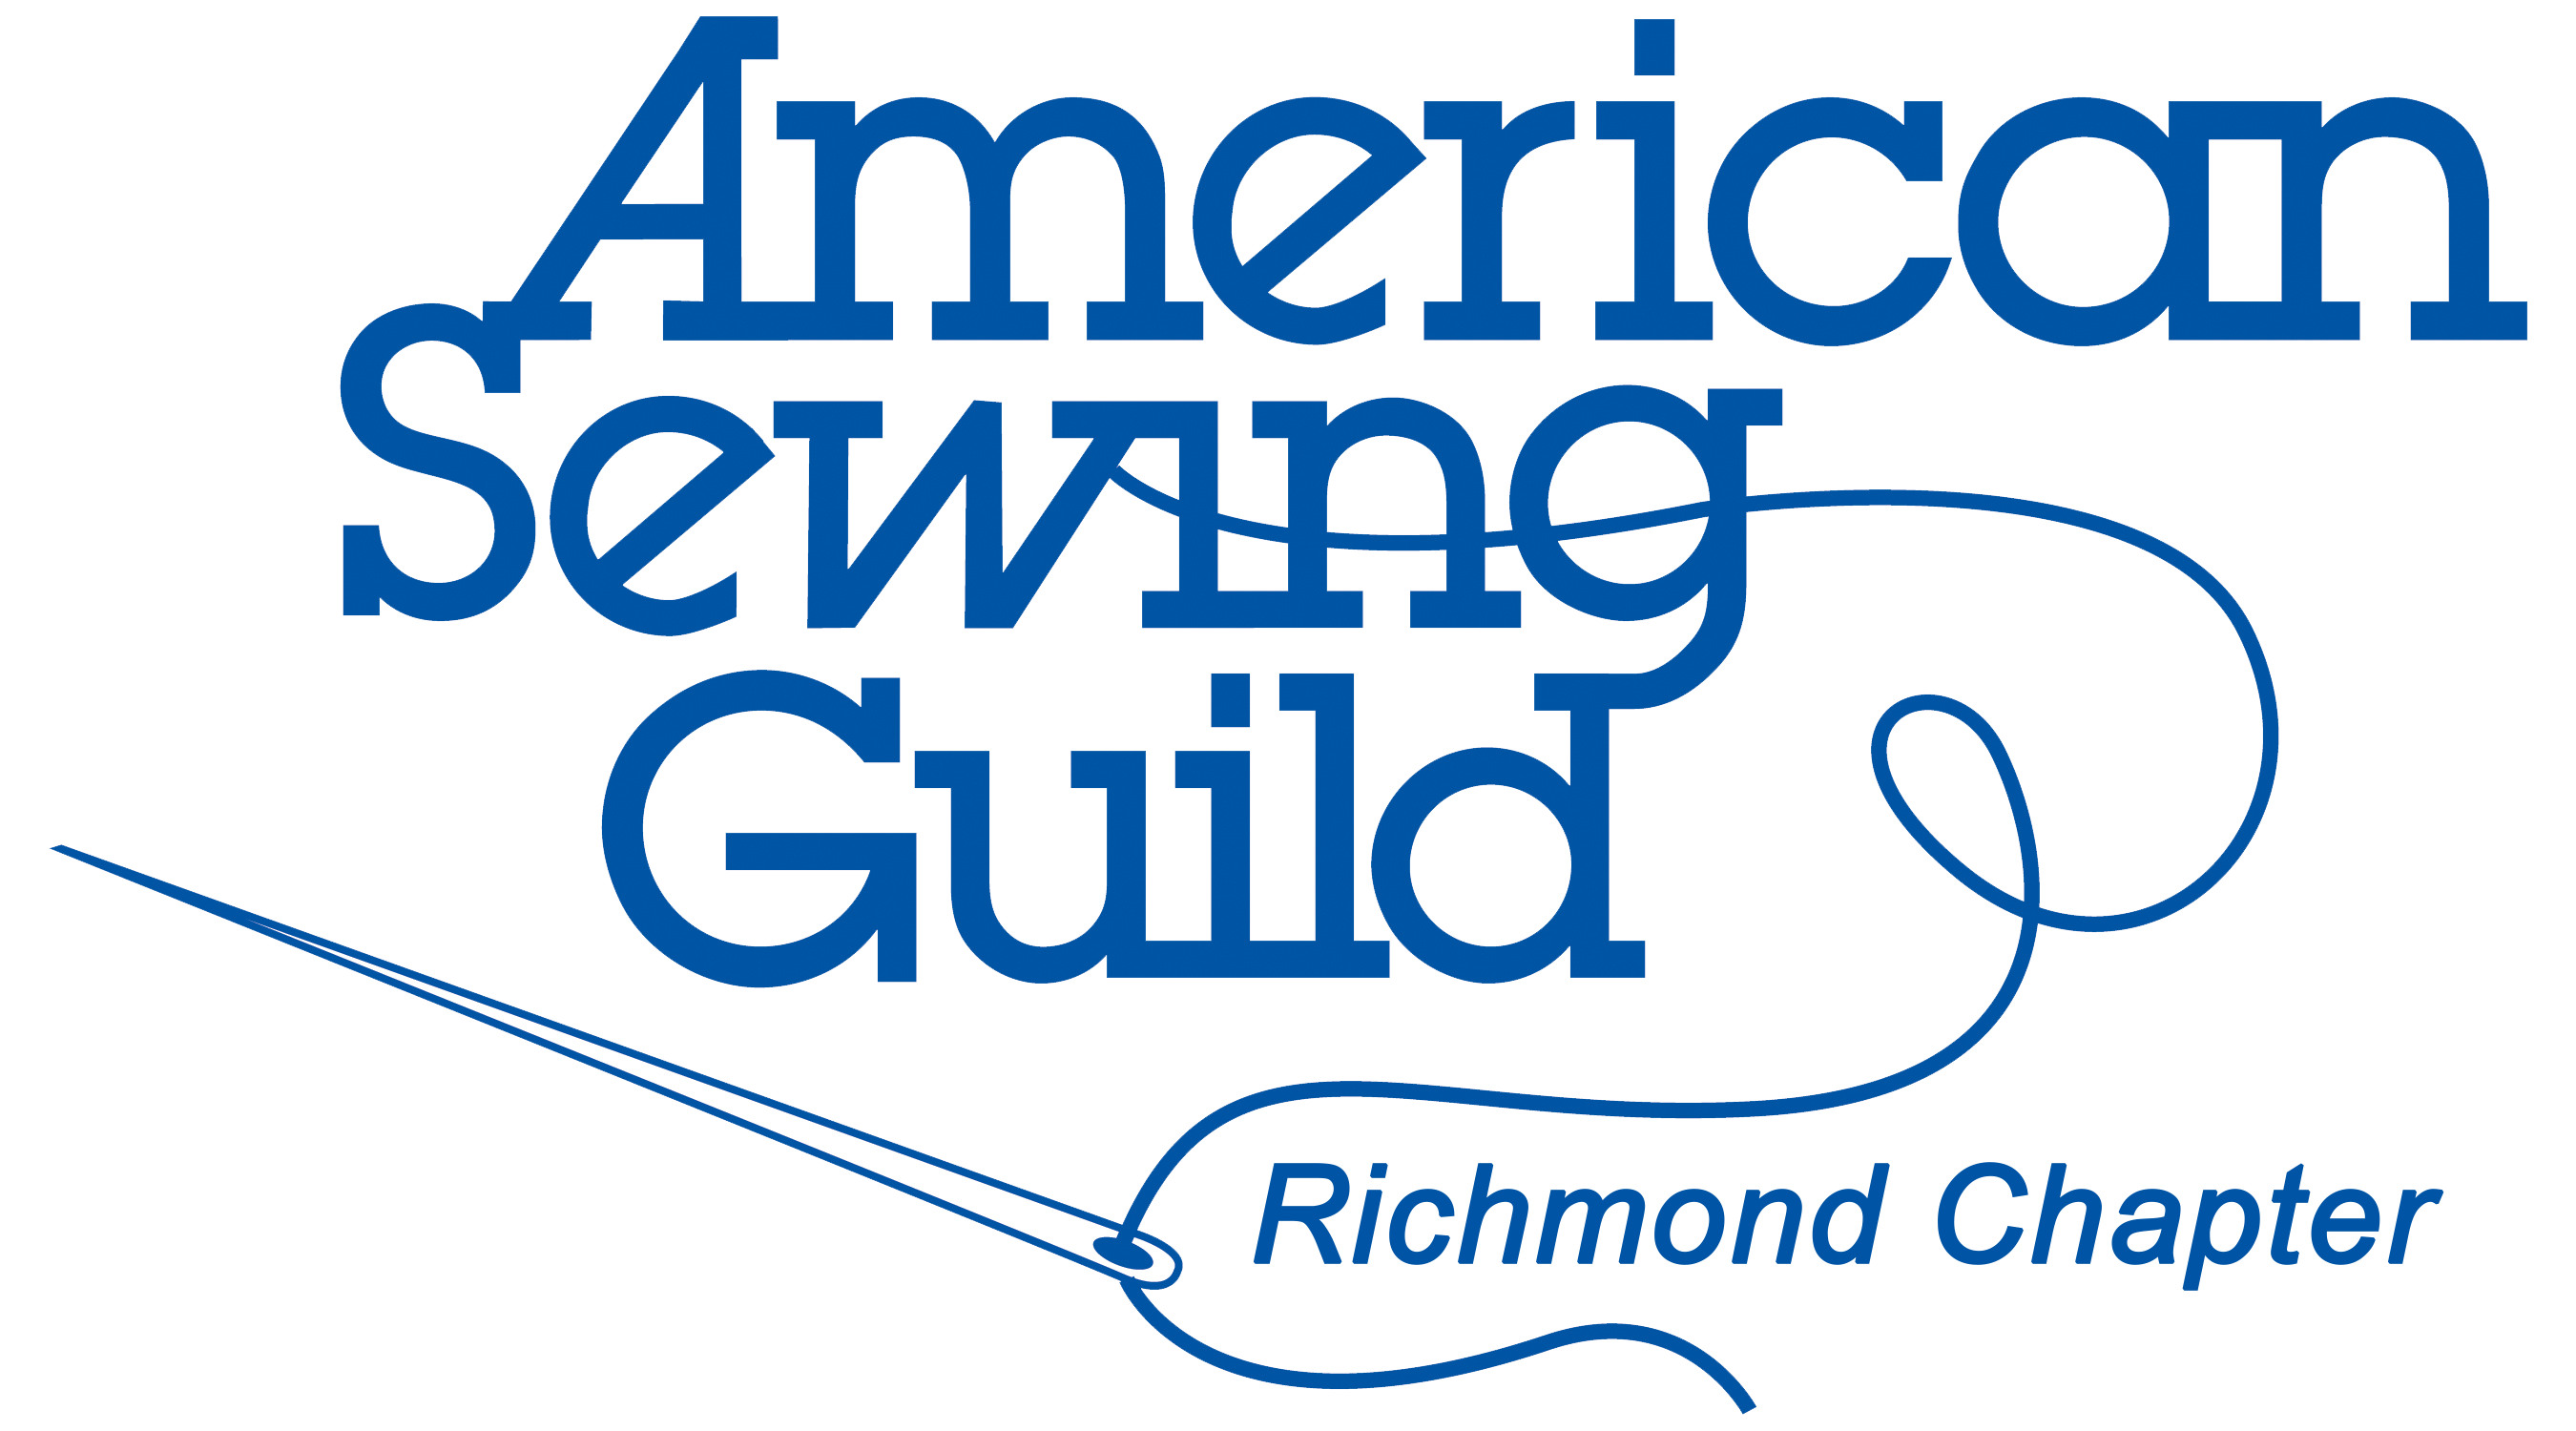 Richmond Chapter - American Sewing Guild